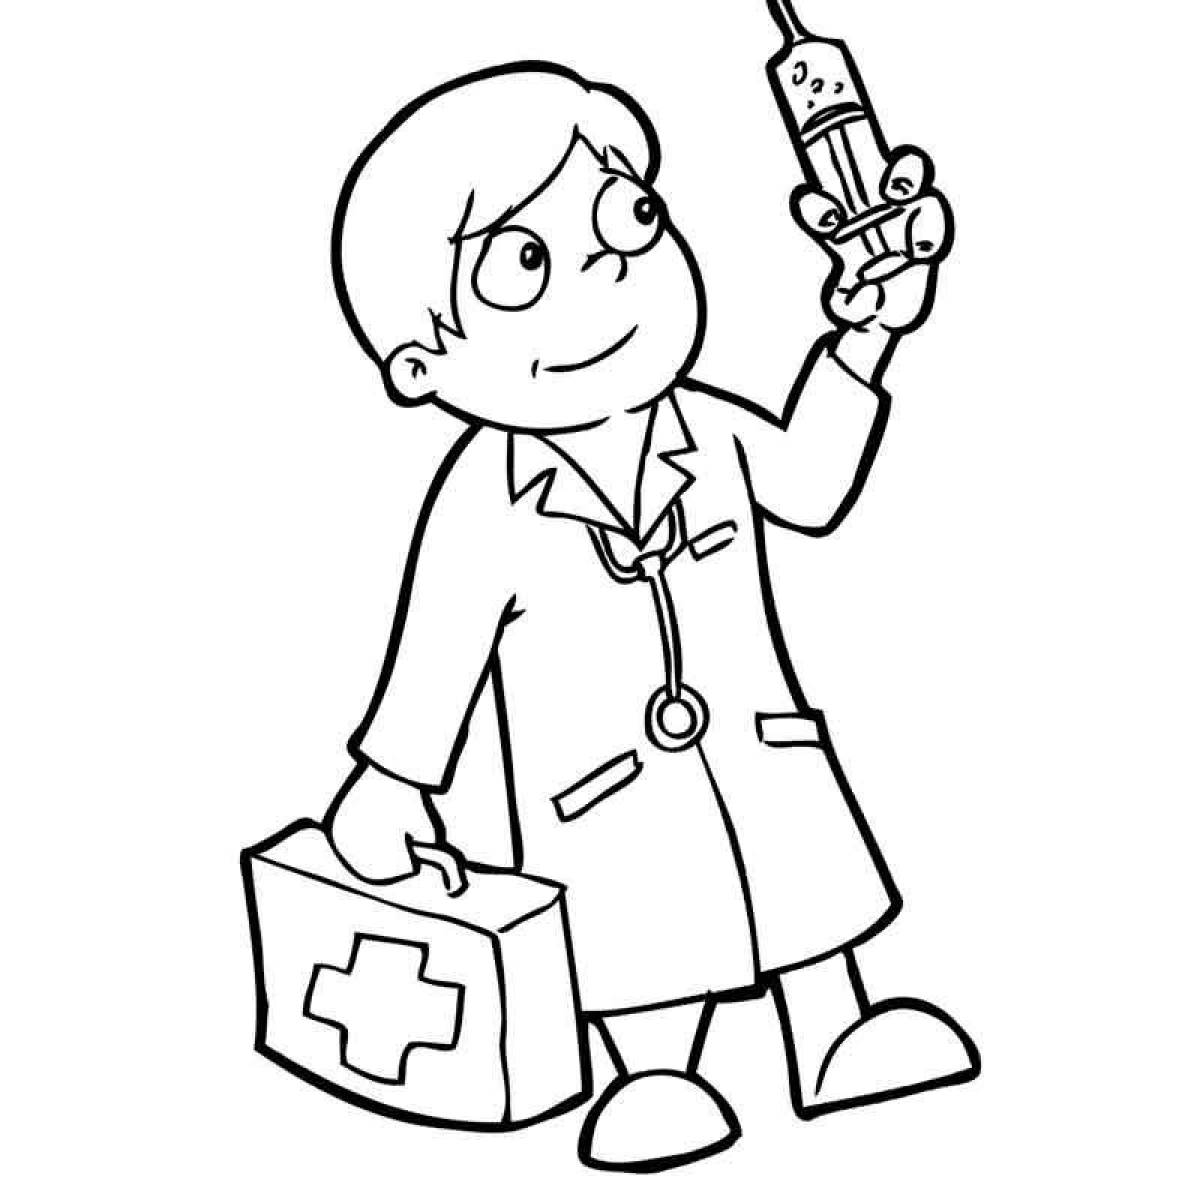 Coloring page funny doctor for kids